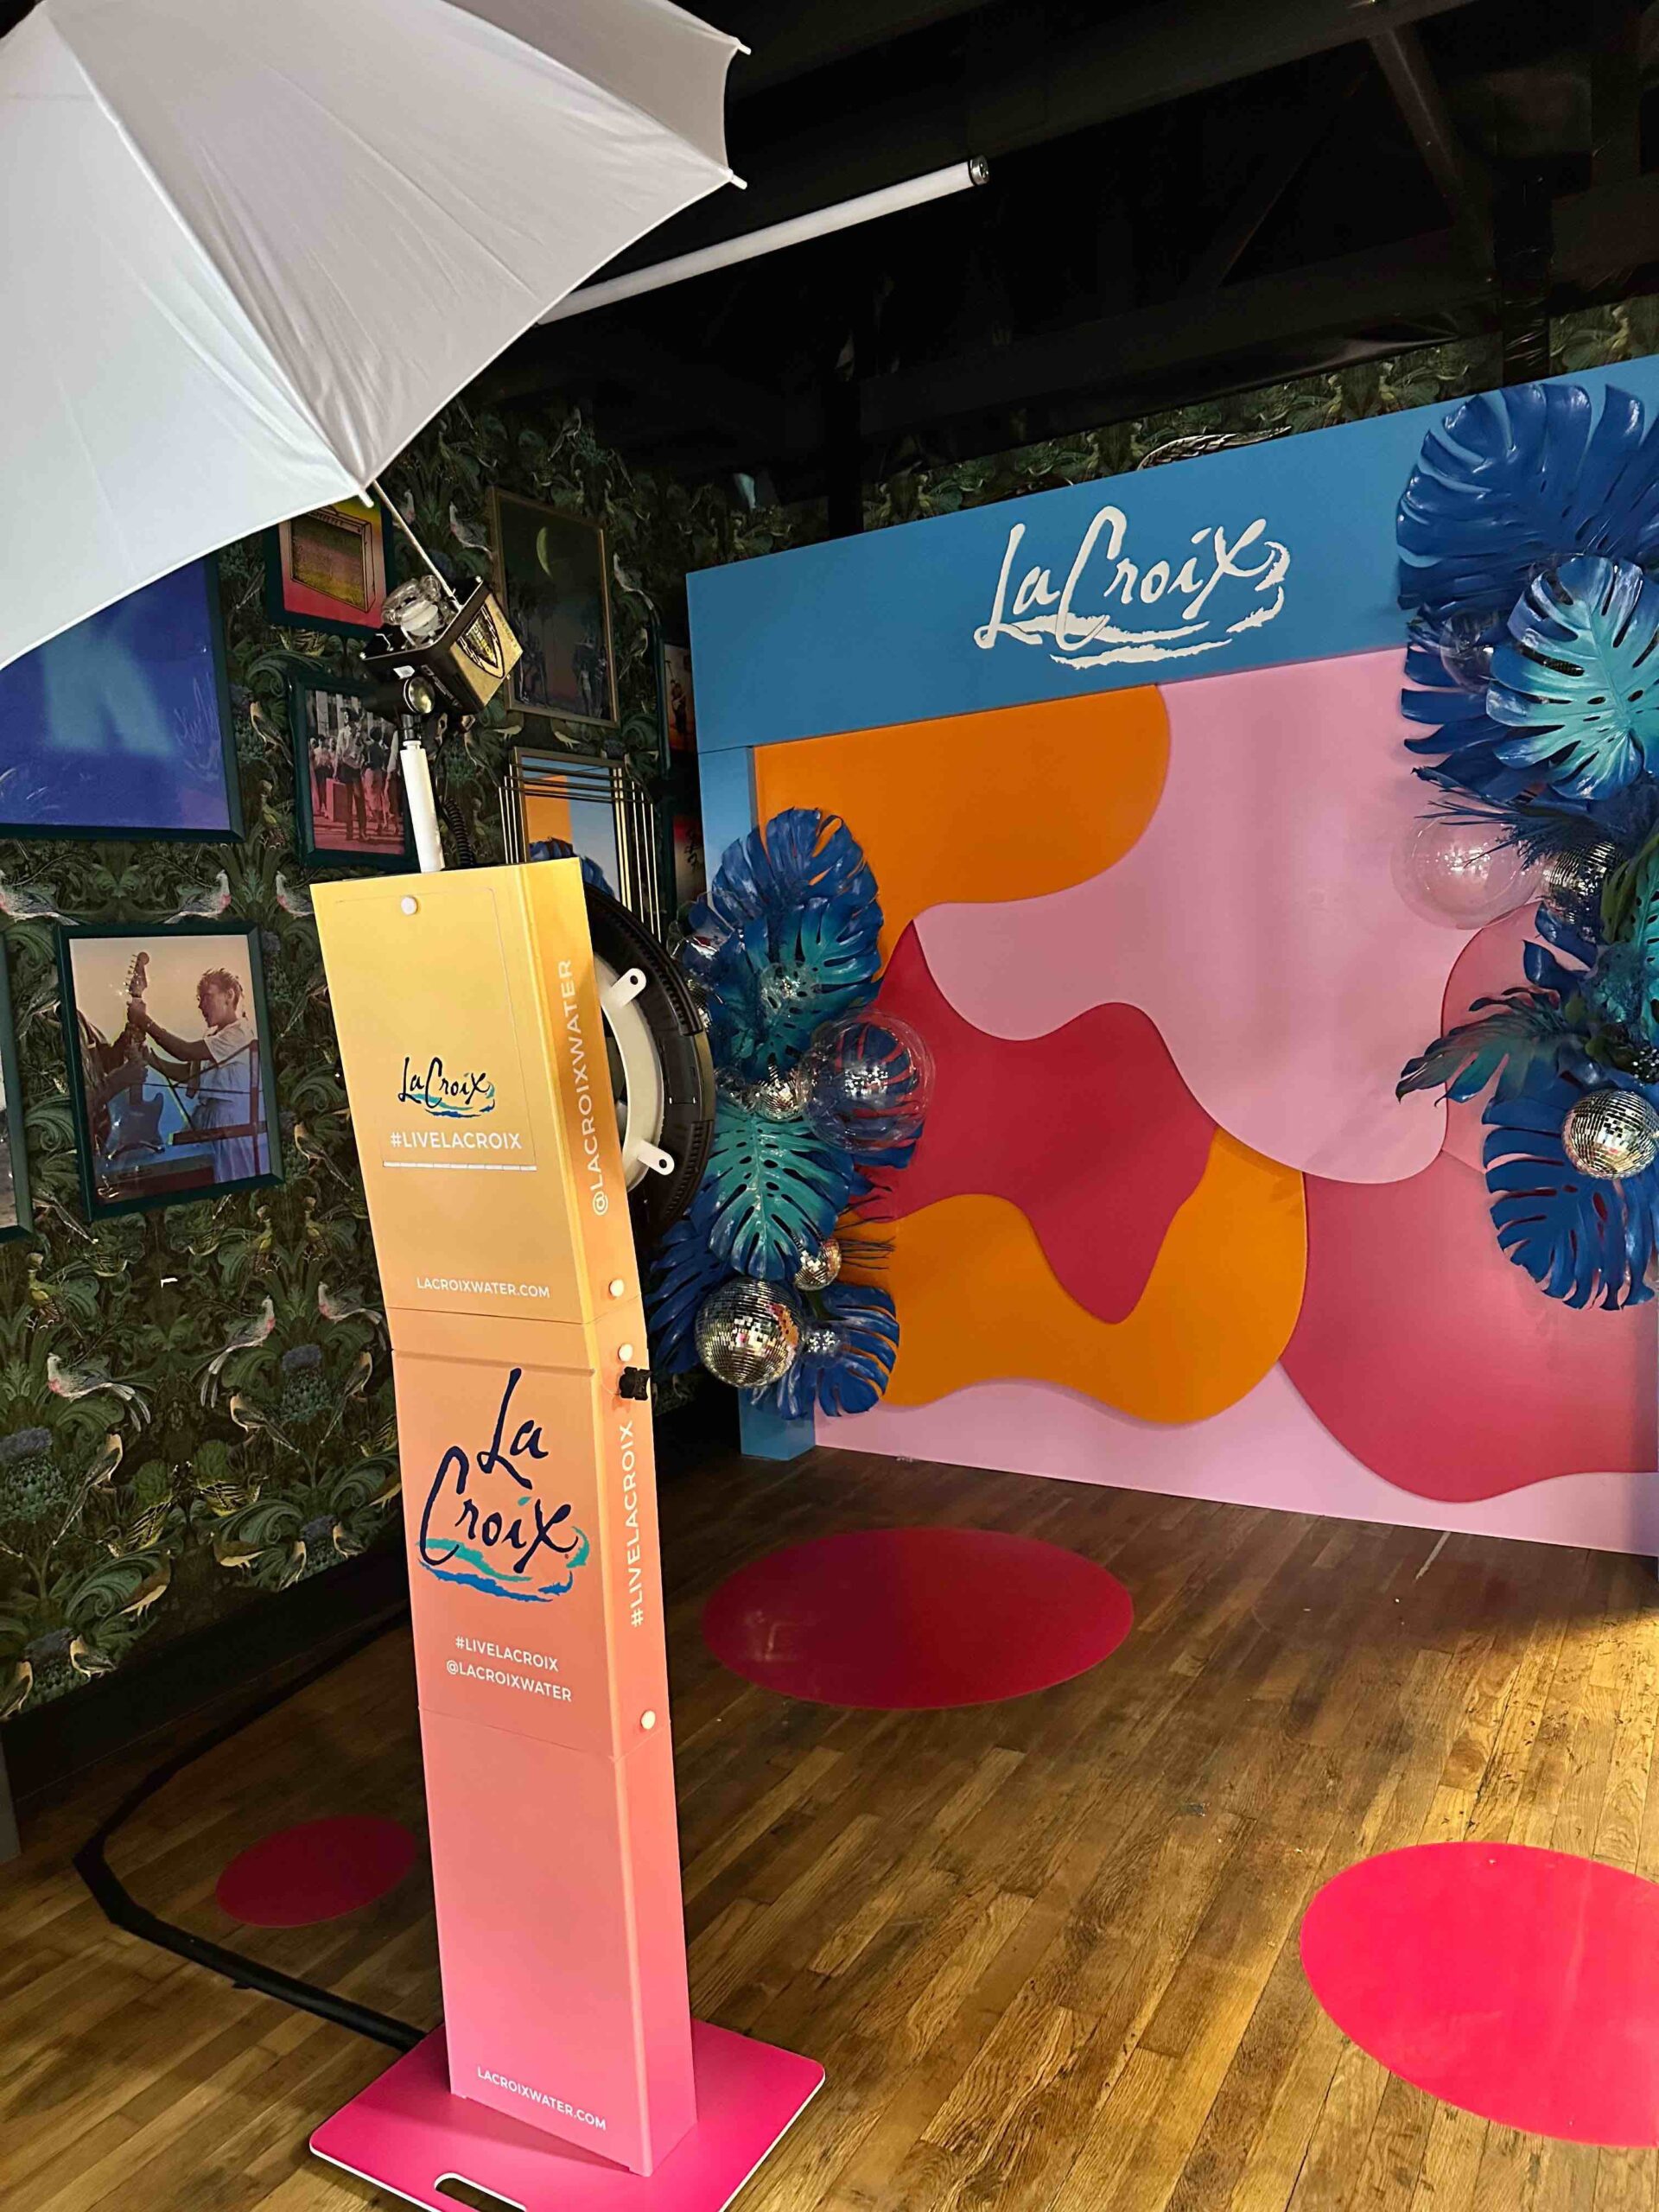 Colorful photobooth at La Croix event featuring pinks, oranges and blues